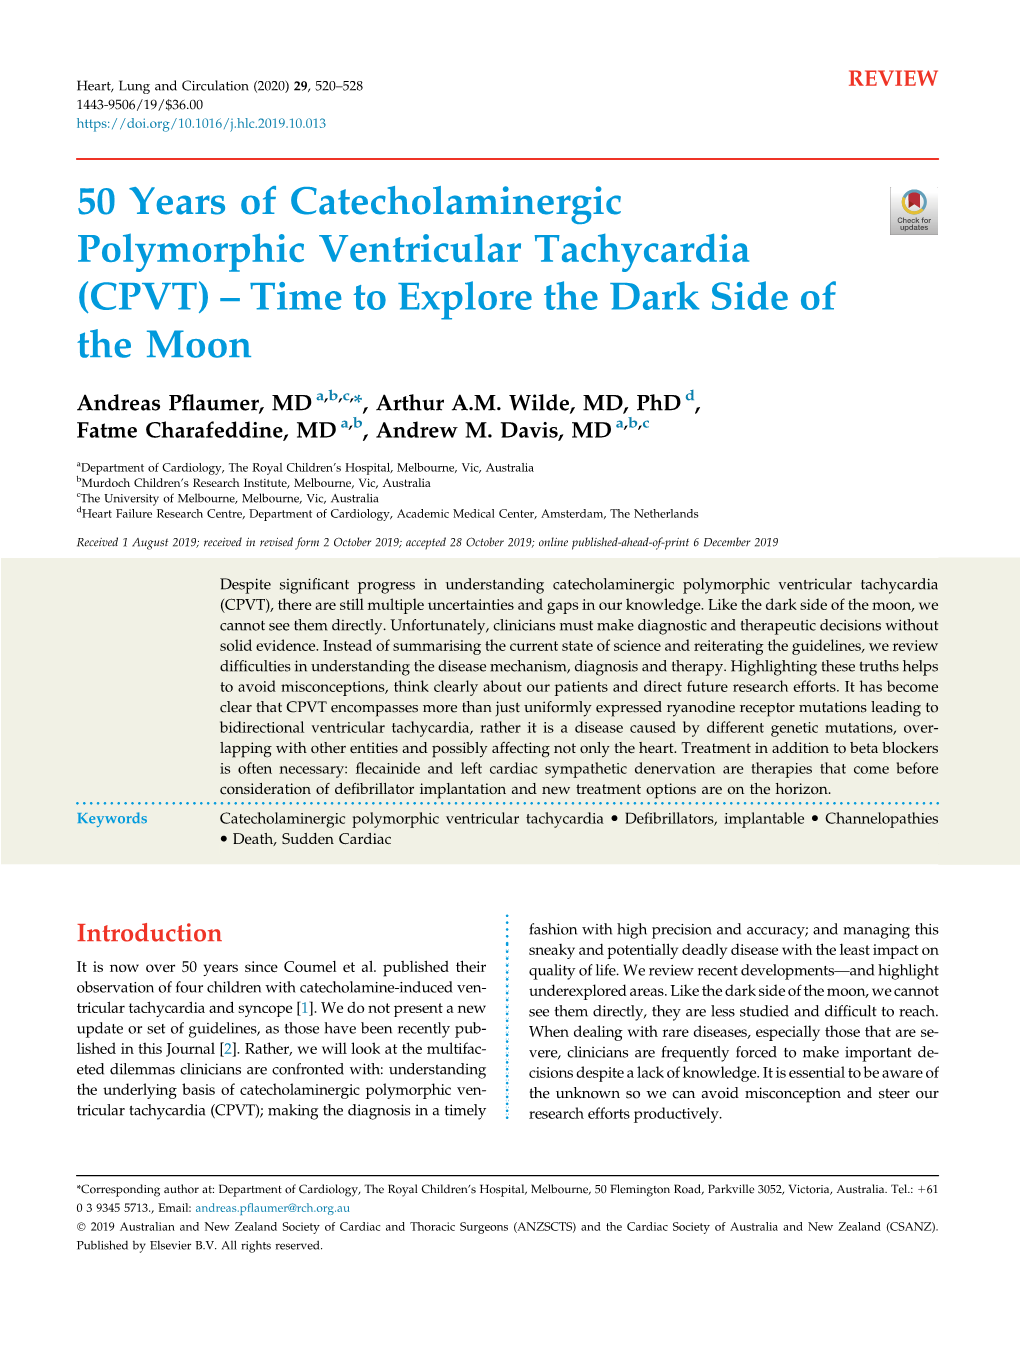 50 Years of Catecholaminergic Polymorphic Ventricular Tachycardia (CPVT) – Time to Explore the Dark Side of the Moon